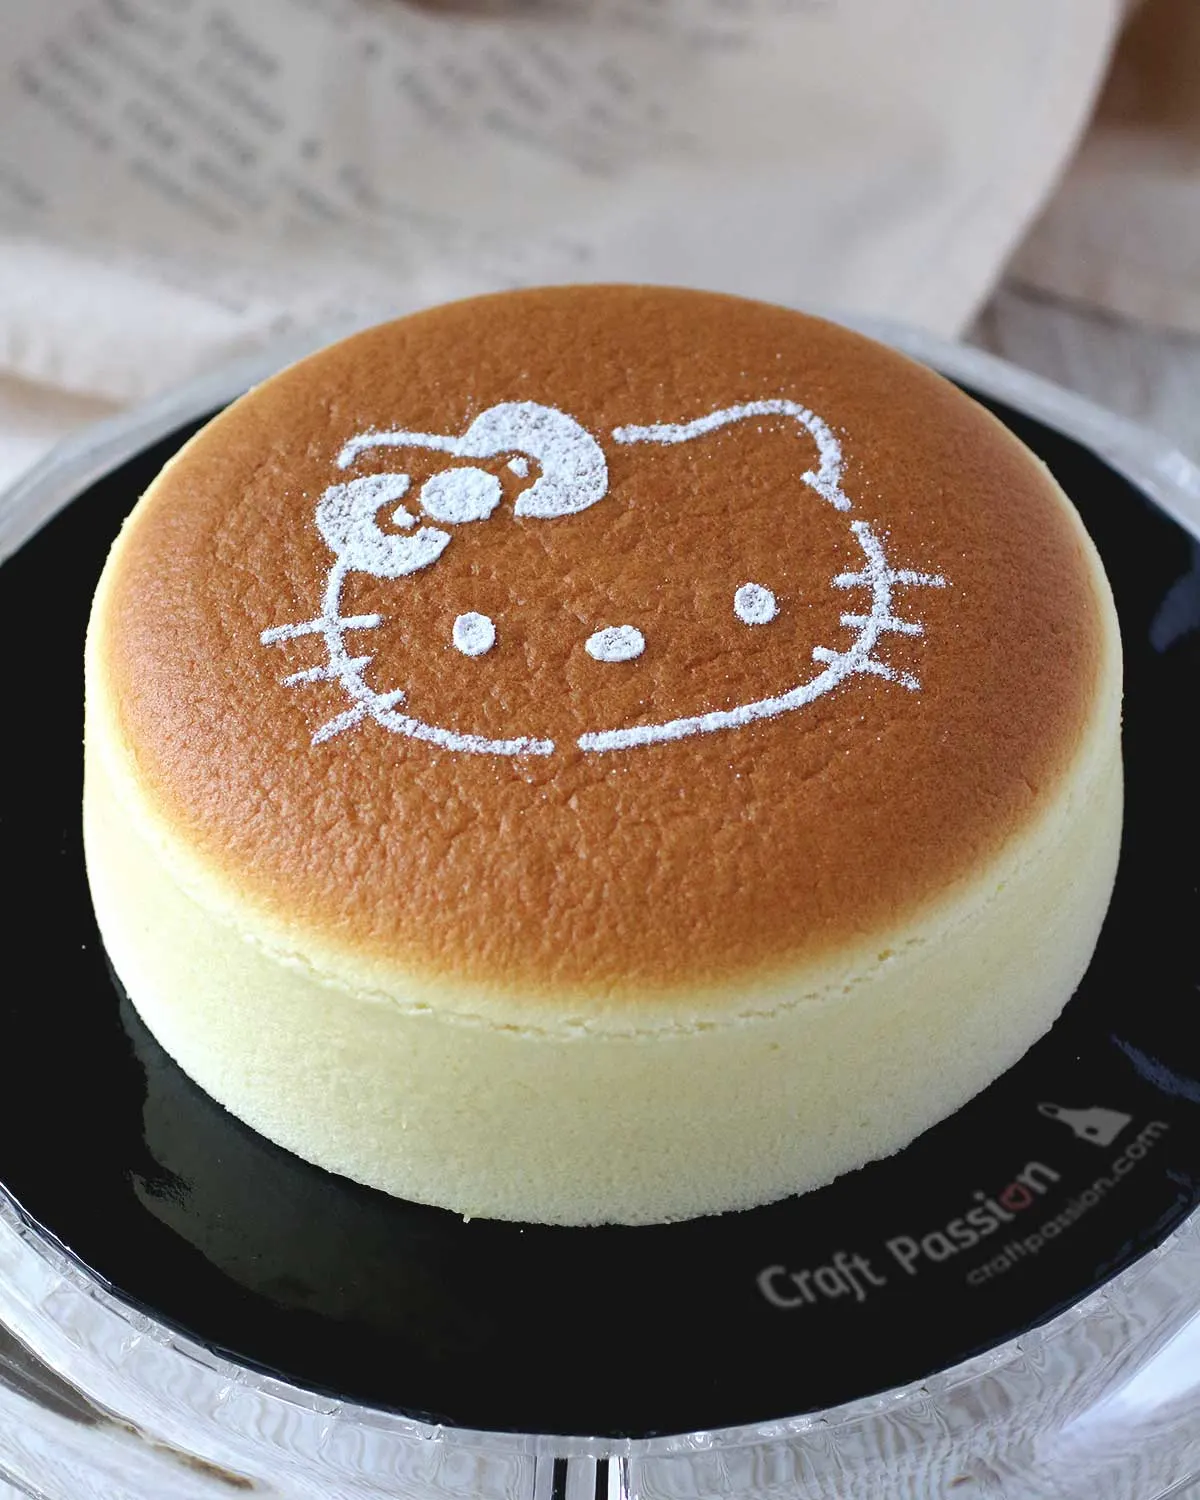 Best Japanese Cheesecake recipe ever! Try out this recipe for a pillowy soft, light-as-air & heavenly cheesecake that includes a step by step video.